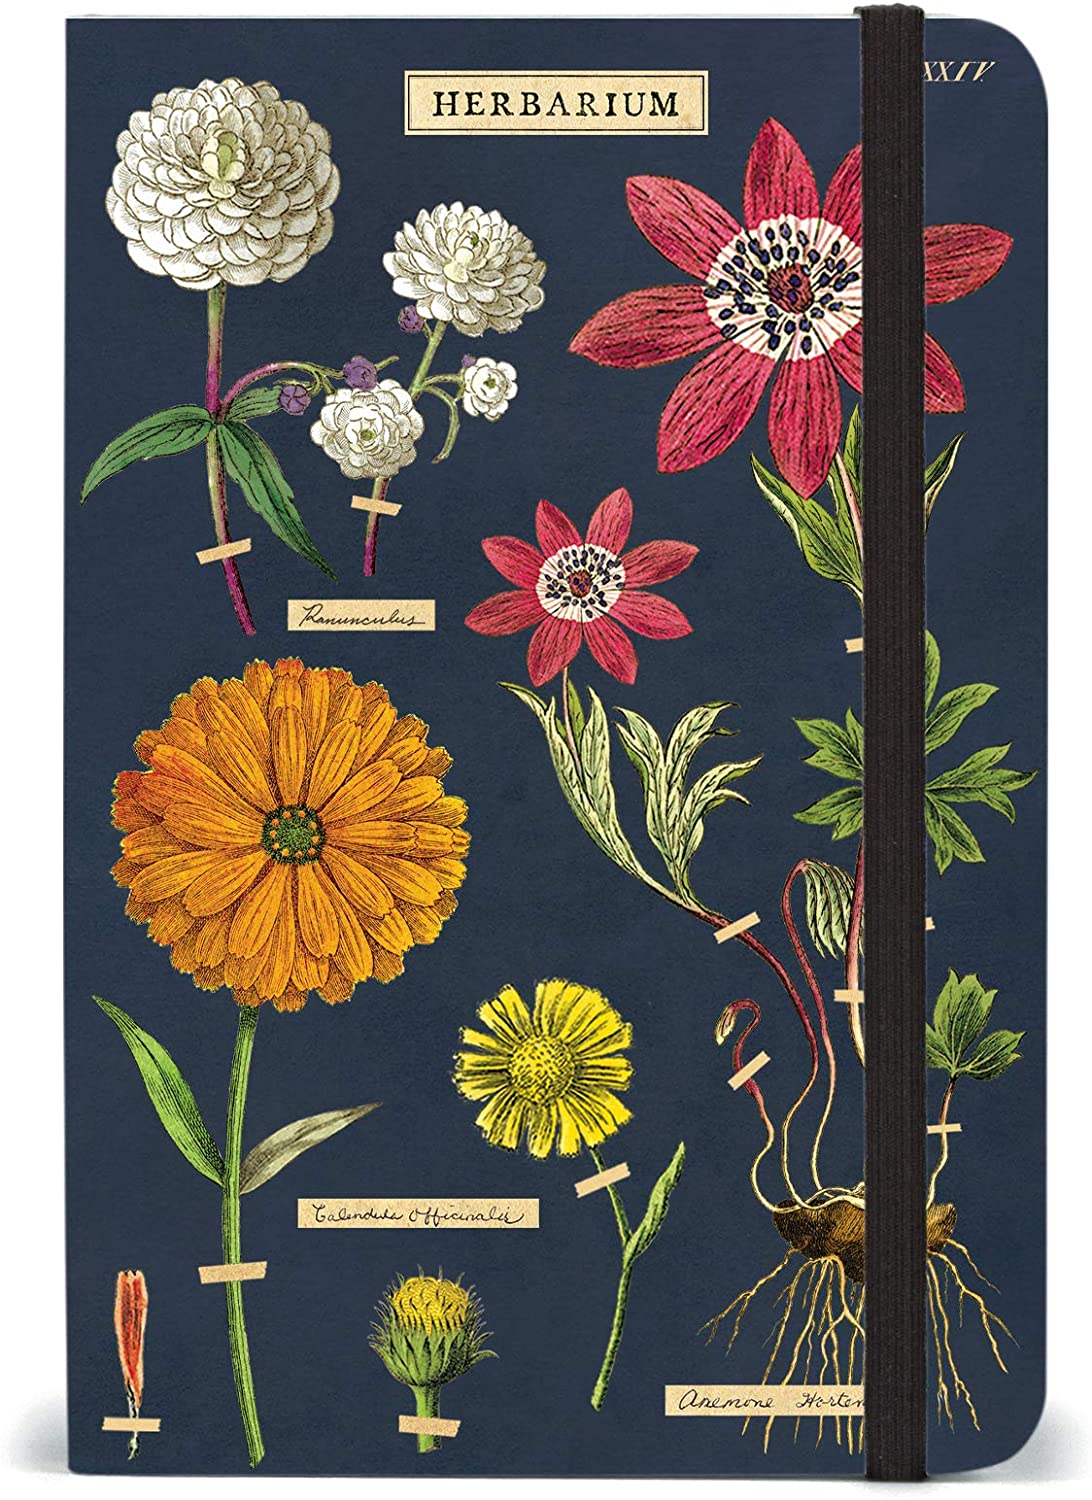 Dark blue notebook reads "Herbarium" and shows labeled illustrations of different flowers